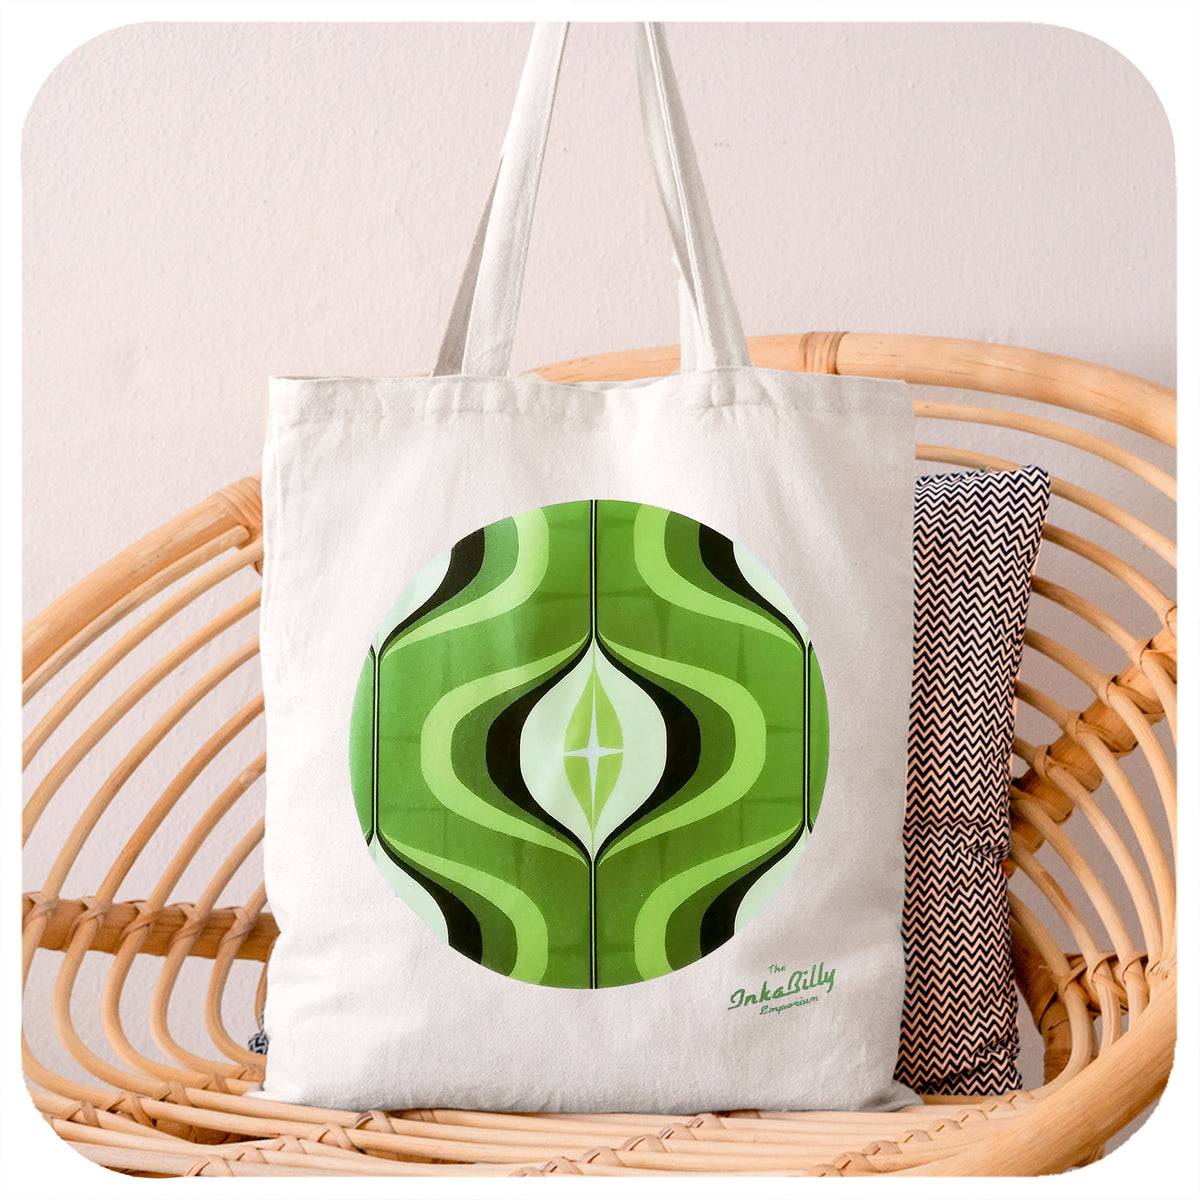 White Tote Bag featuring a green 70s style op art design sits on a rattan chair | The Inkabilly Emporium